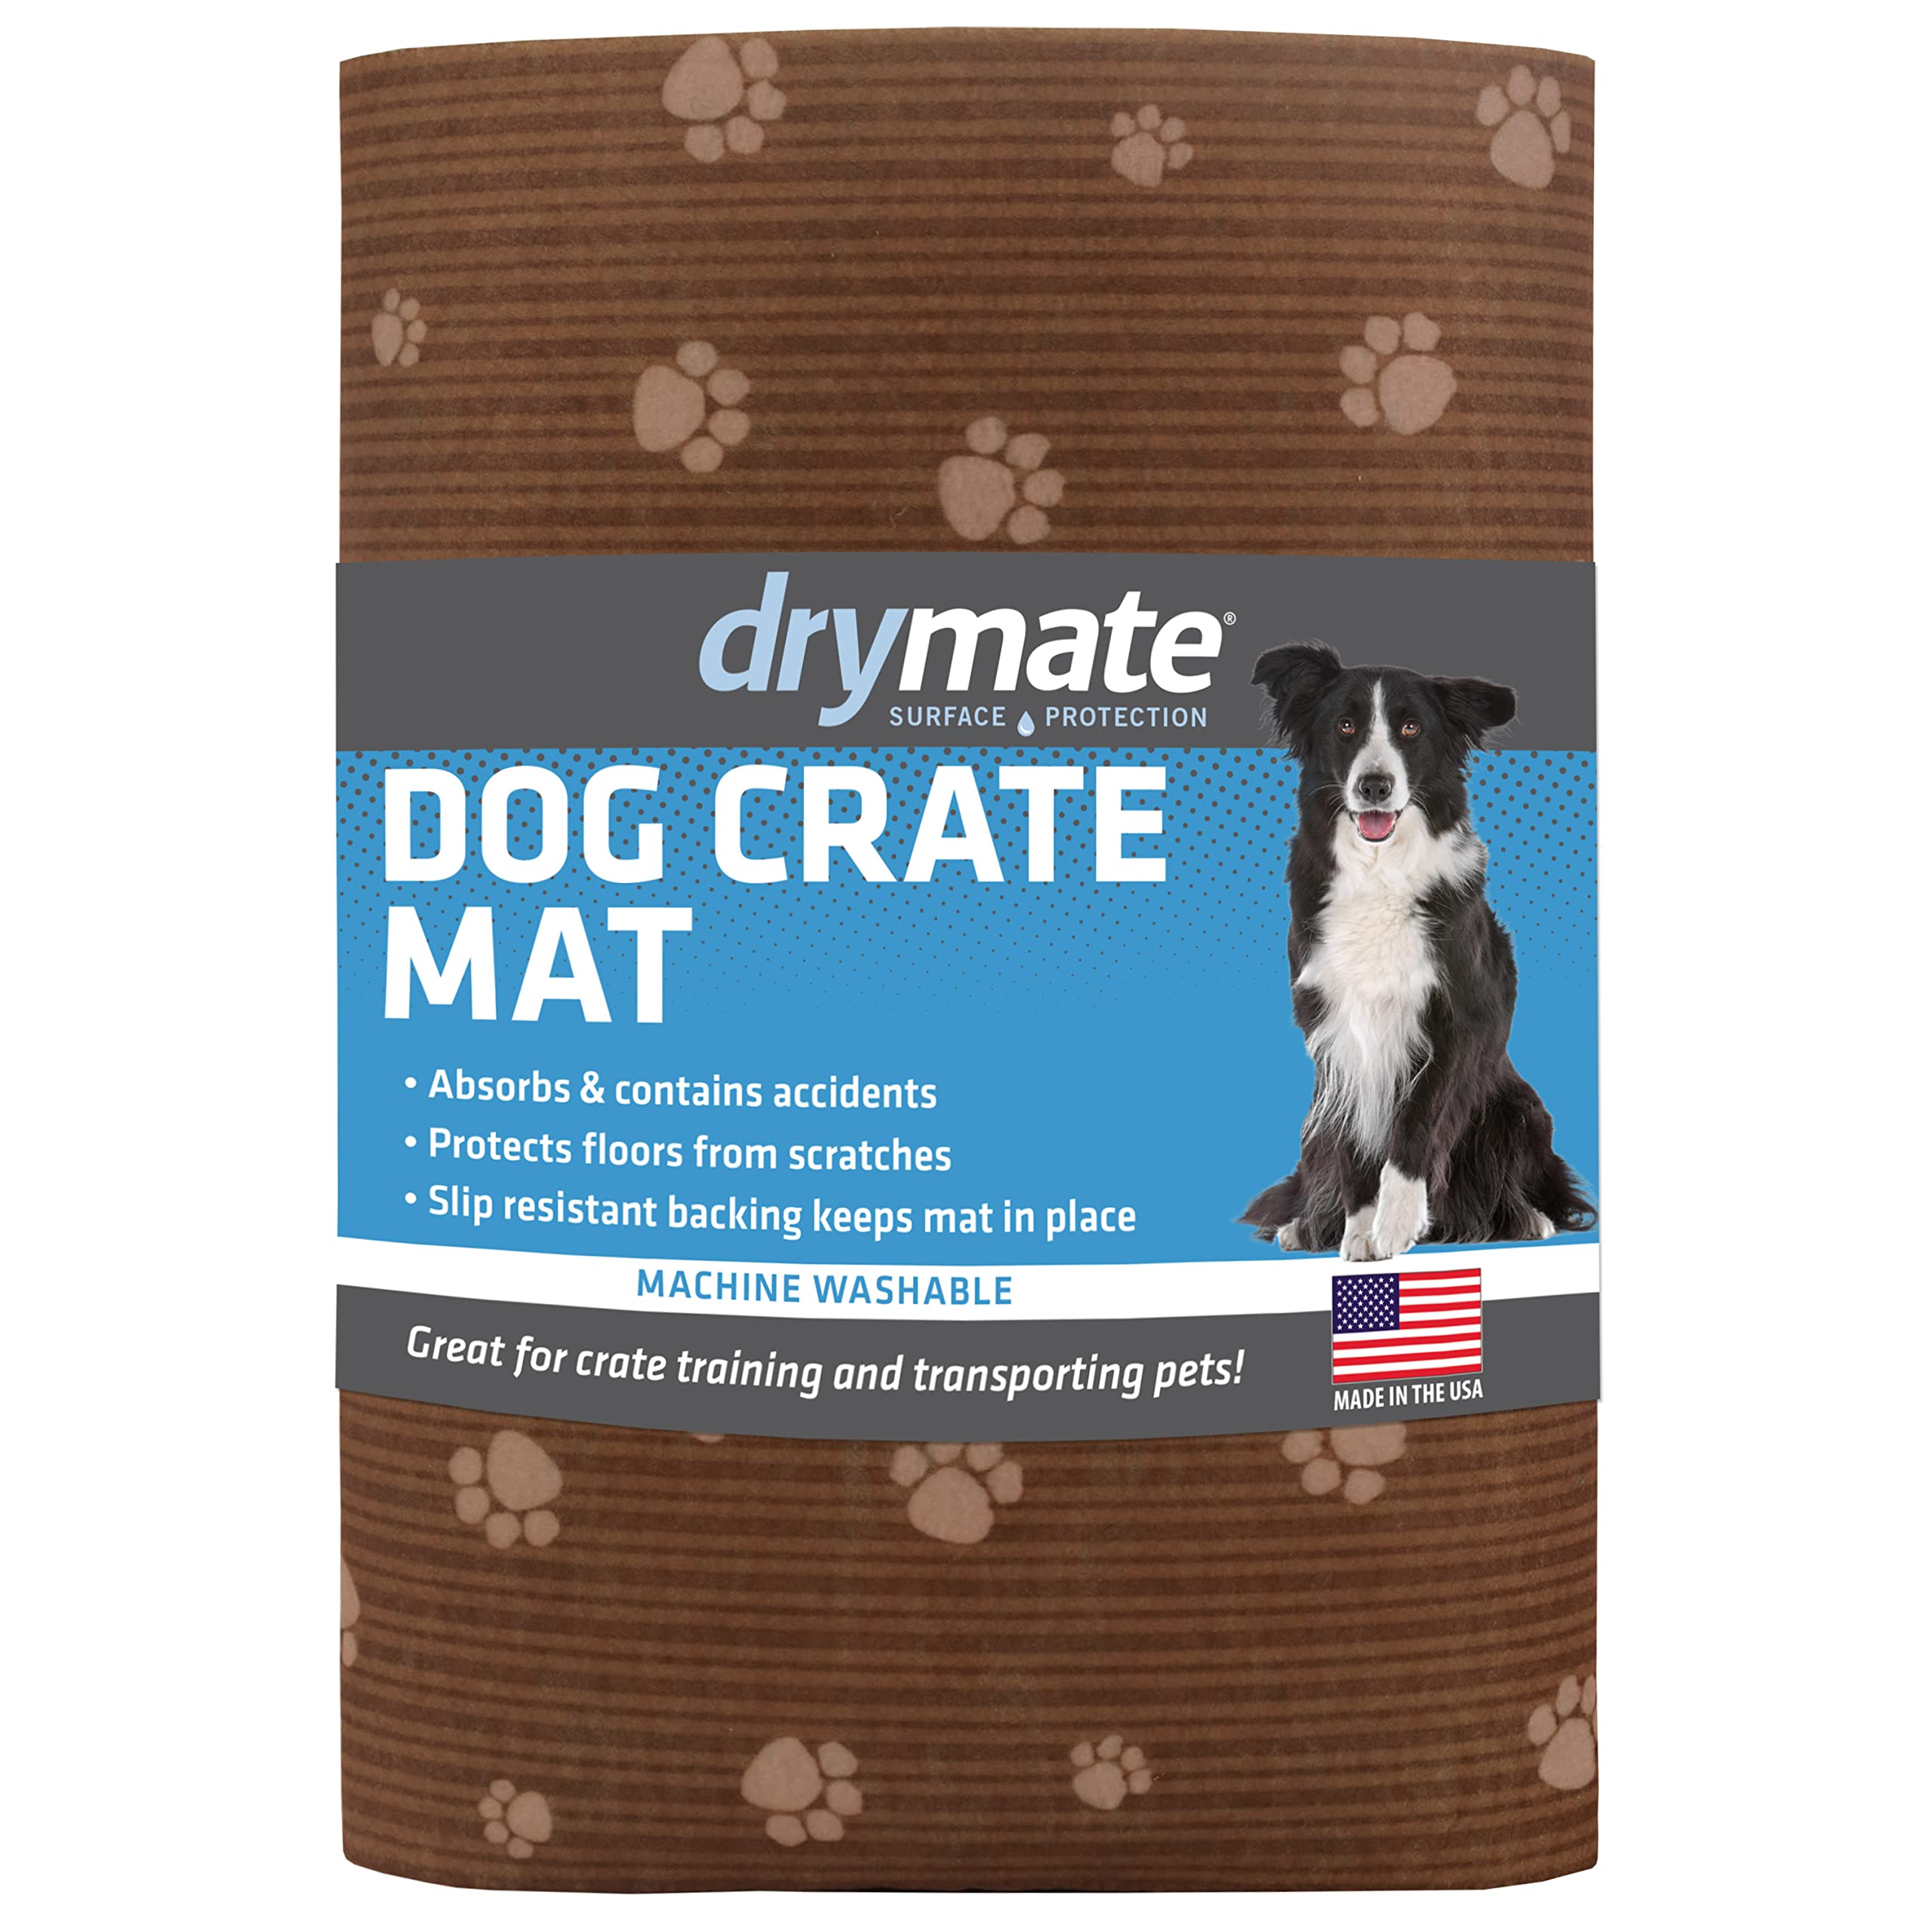 Drymate Dog Bowl Placemat - Absorbent/Waterproof/Machine Washable & Reviews